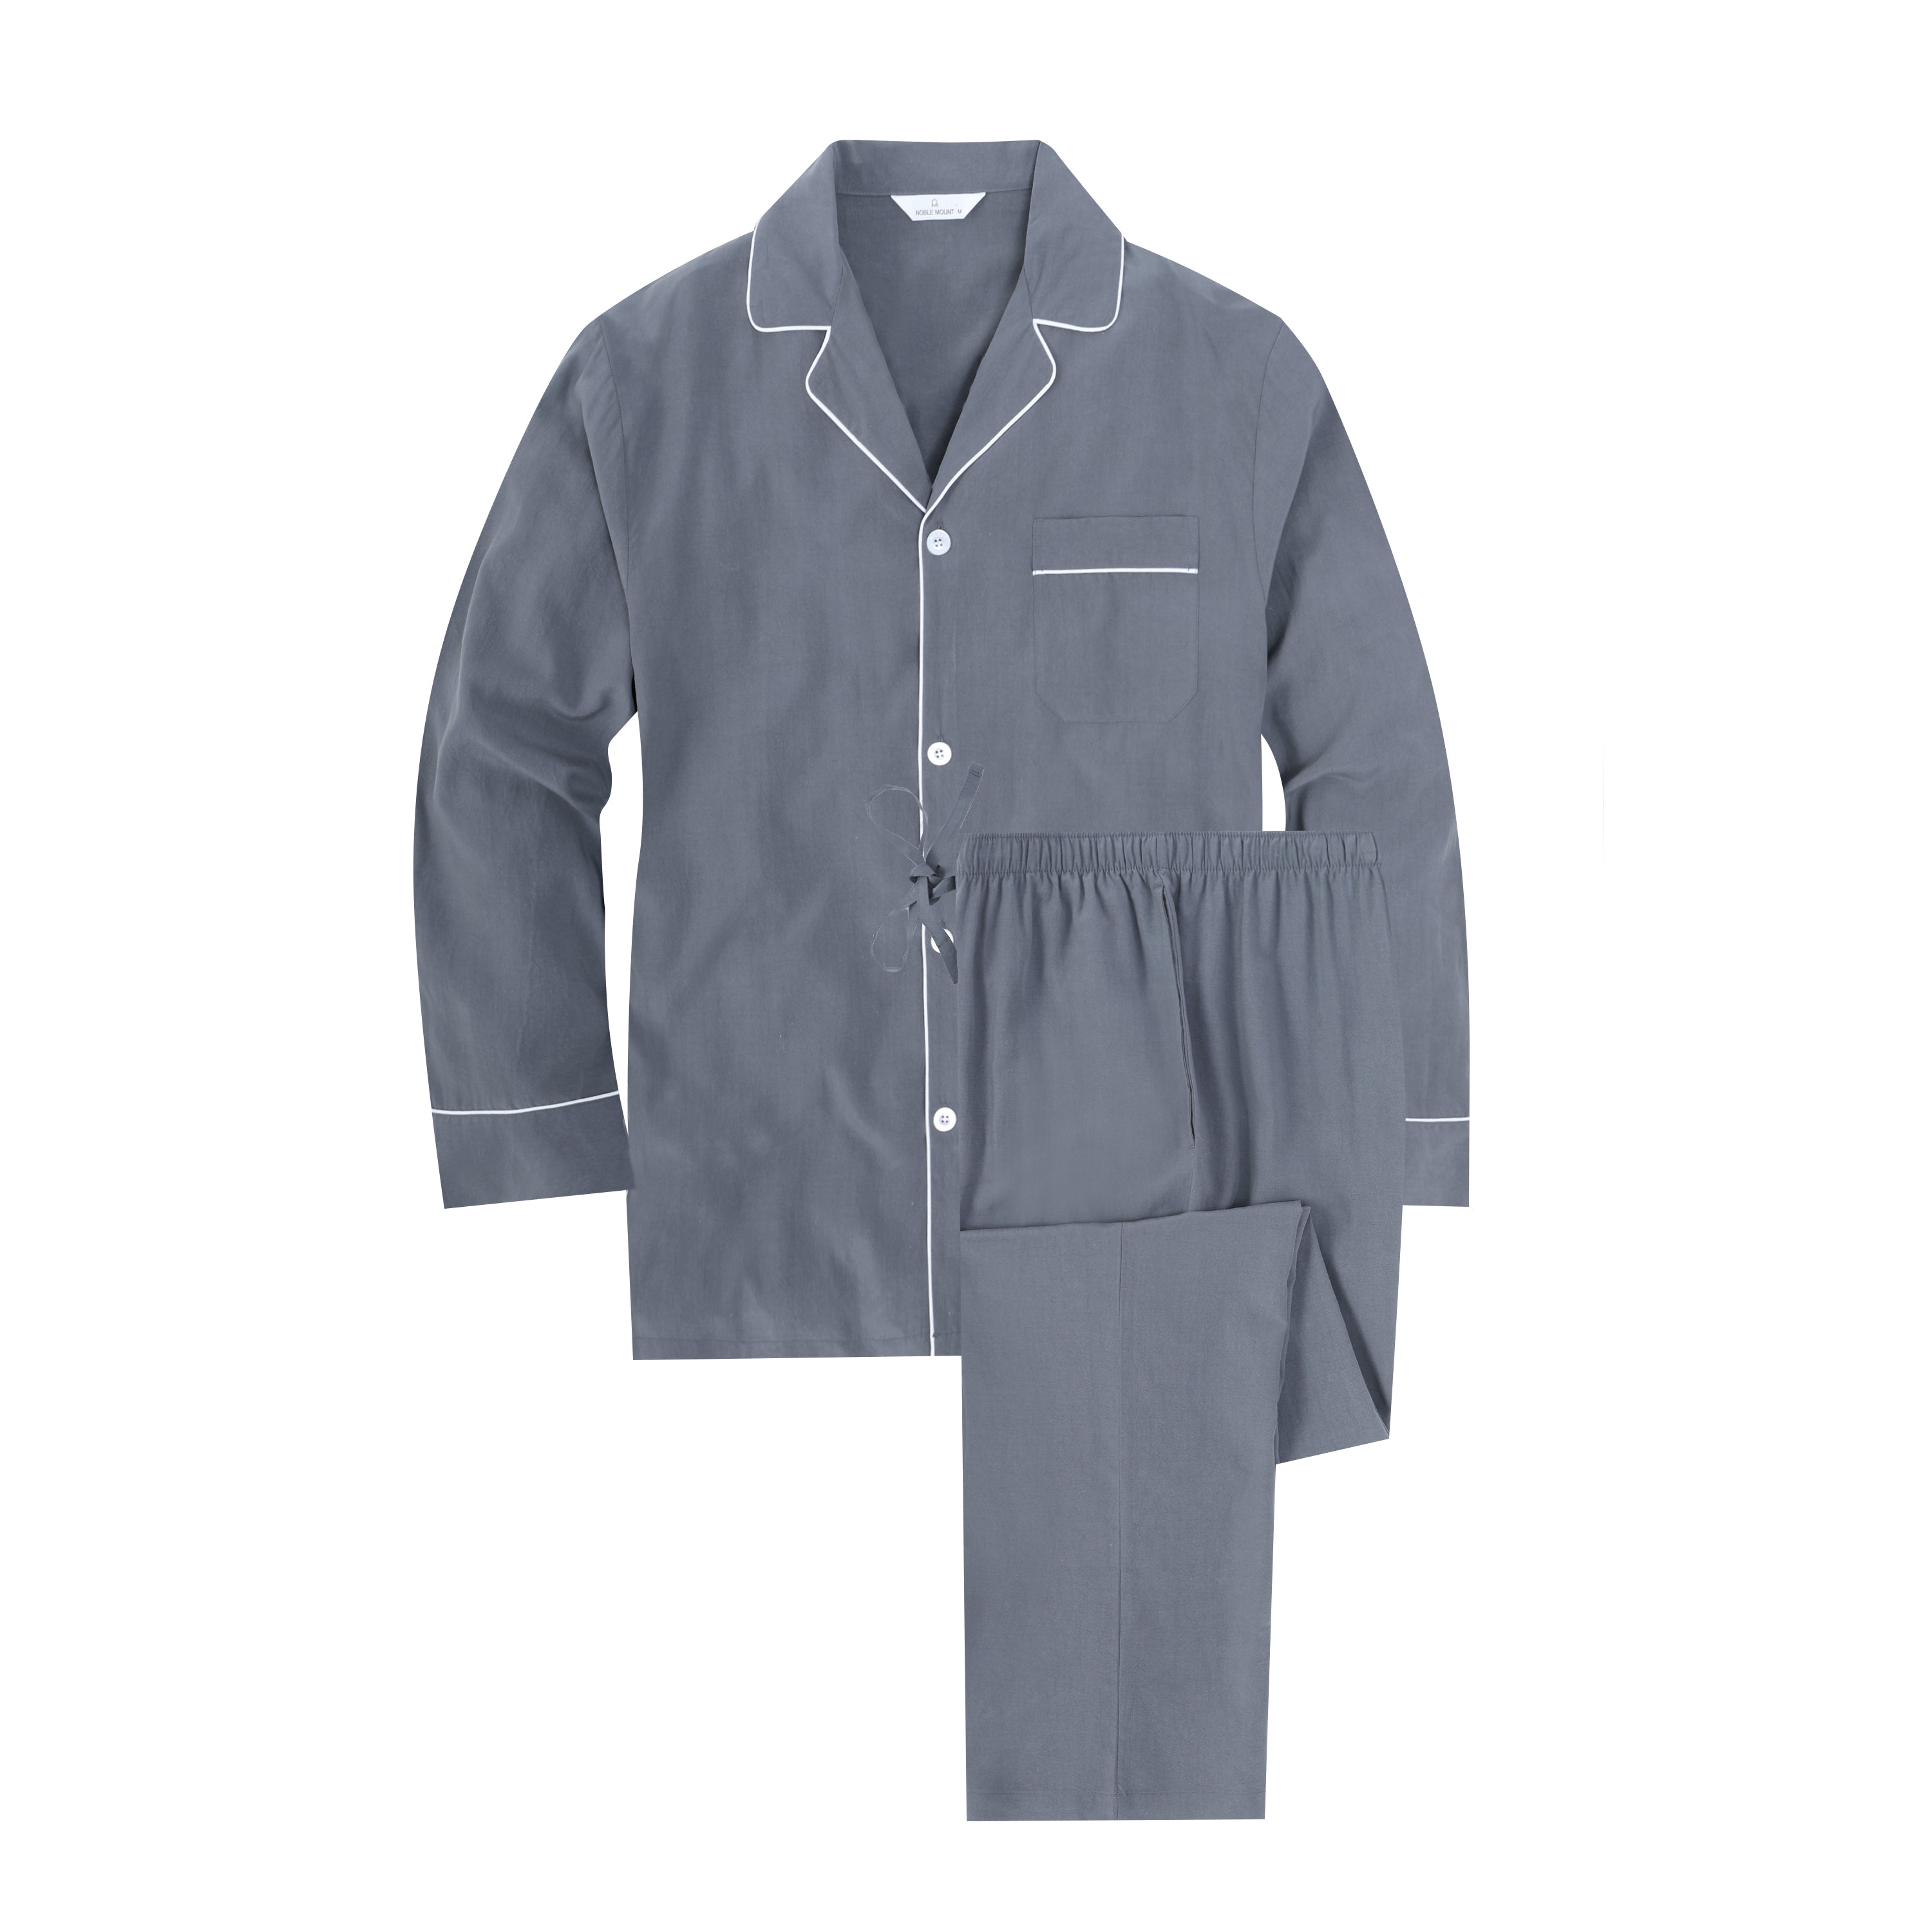 Mens 2-Piece Cooling Pajama Set made from Eucalyptus Tencel - Hypoallergenic and Eco-Friendly Fabric